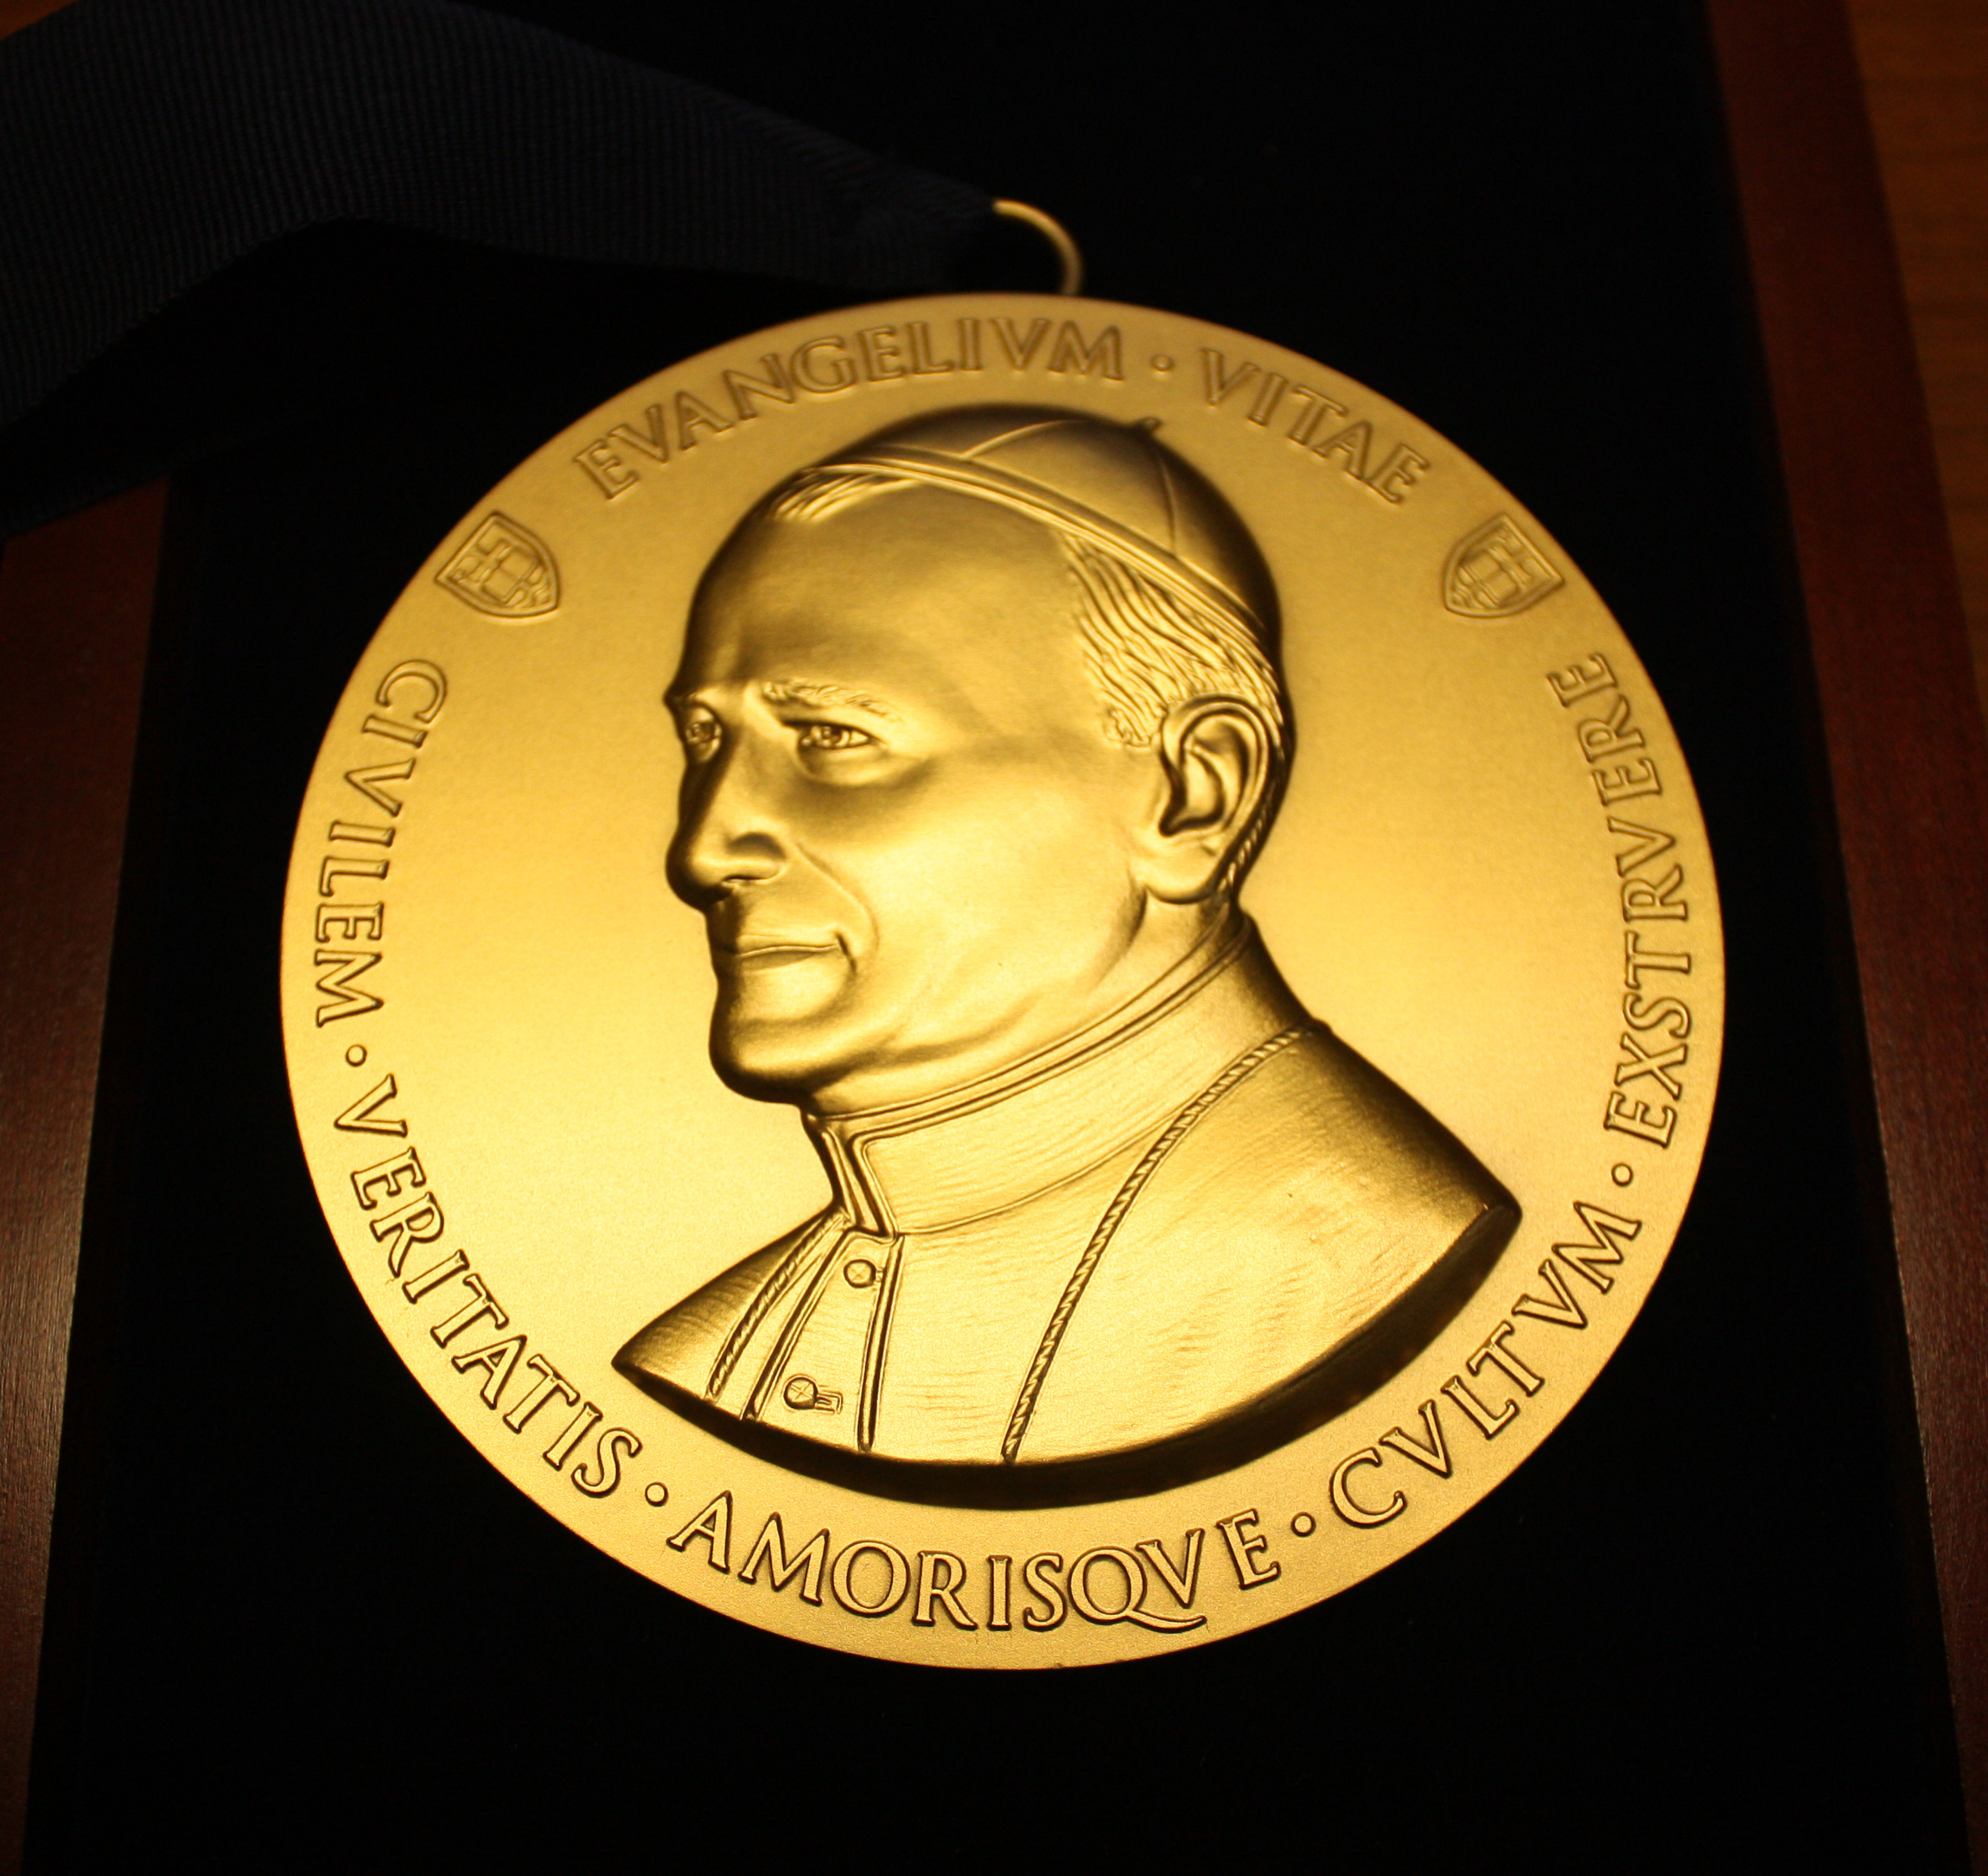 Inaugurated in 2011, the Evangelium Vitae medal is given annually by the University of Notre Dame Fund to Protect Human Life to an individual who steadfastly affirms and defends the sanctity of human life. (CNS) 